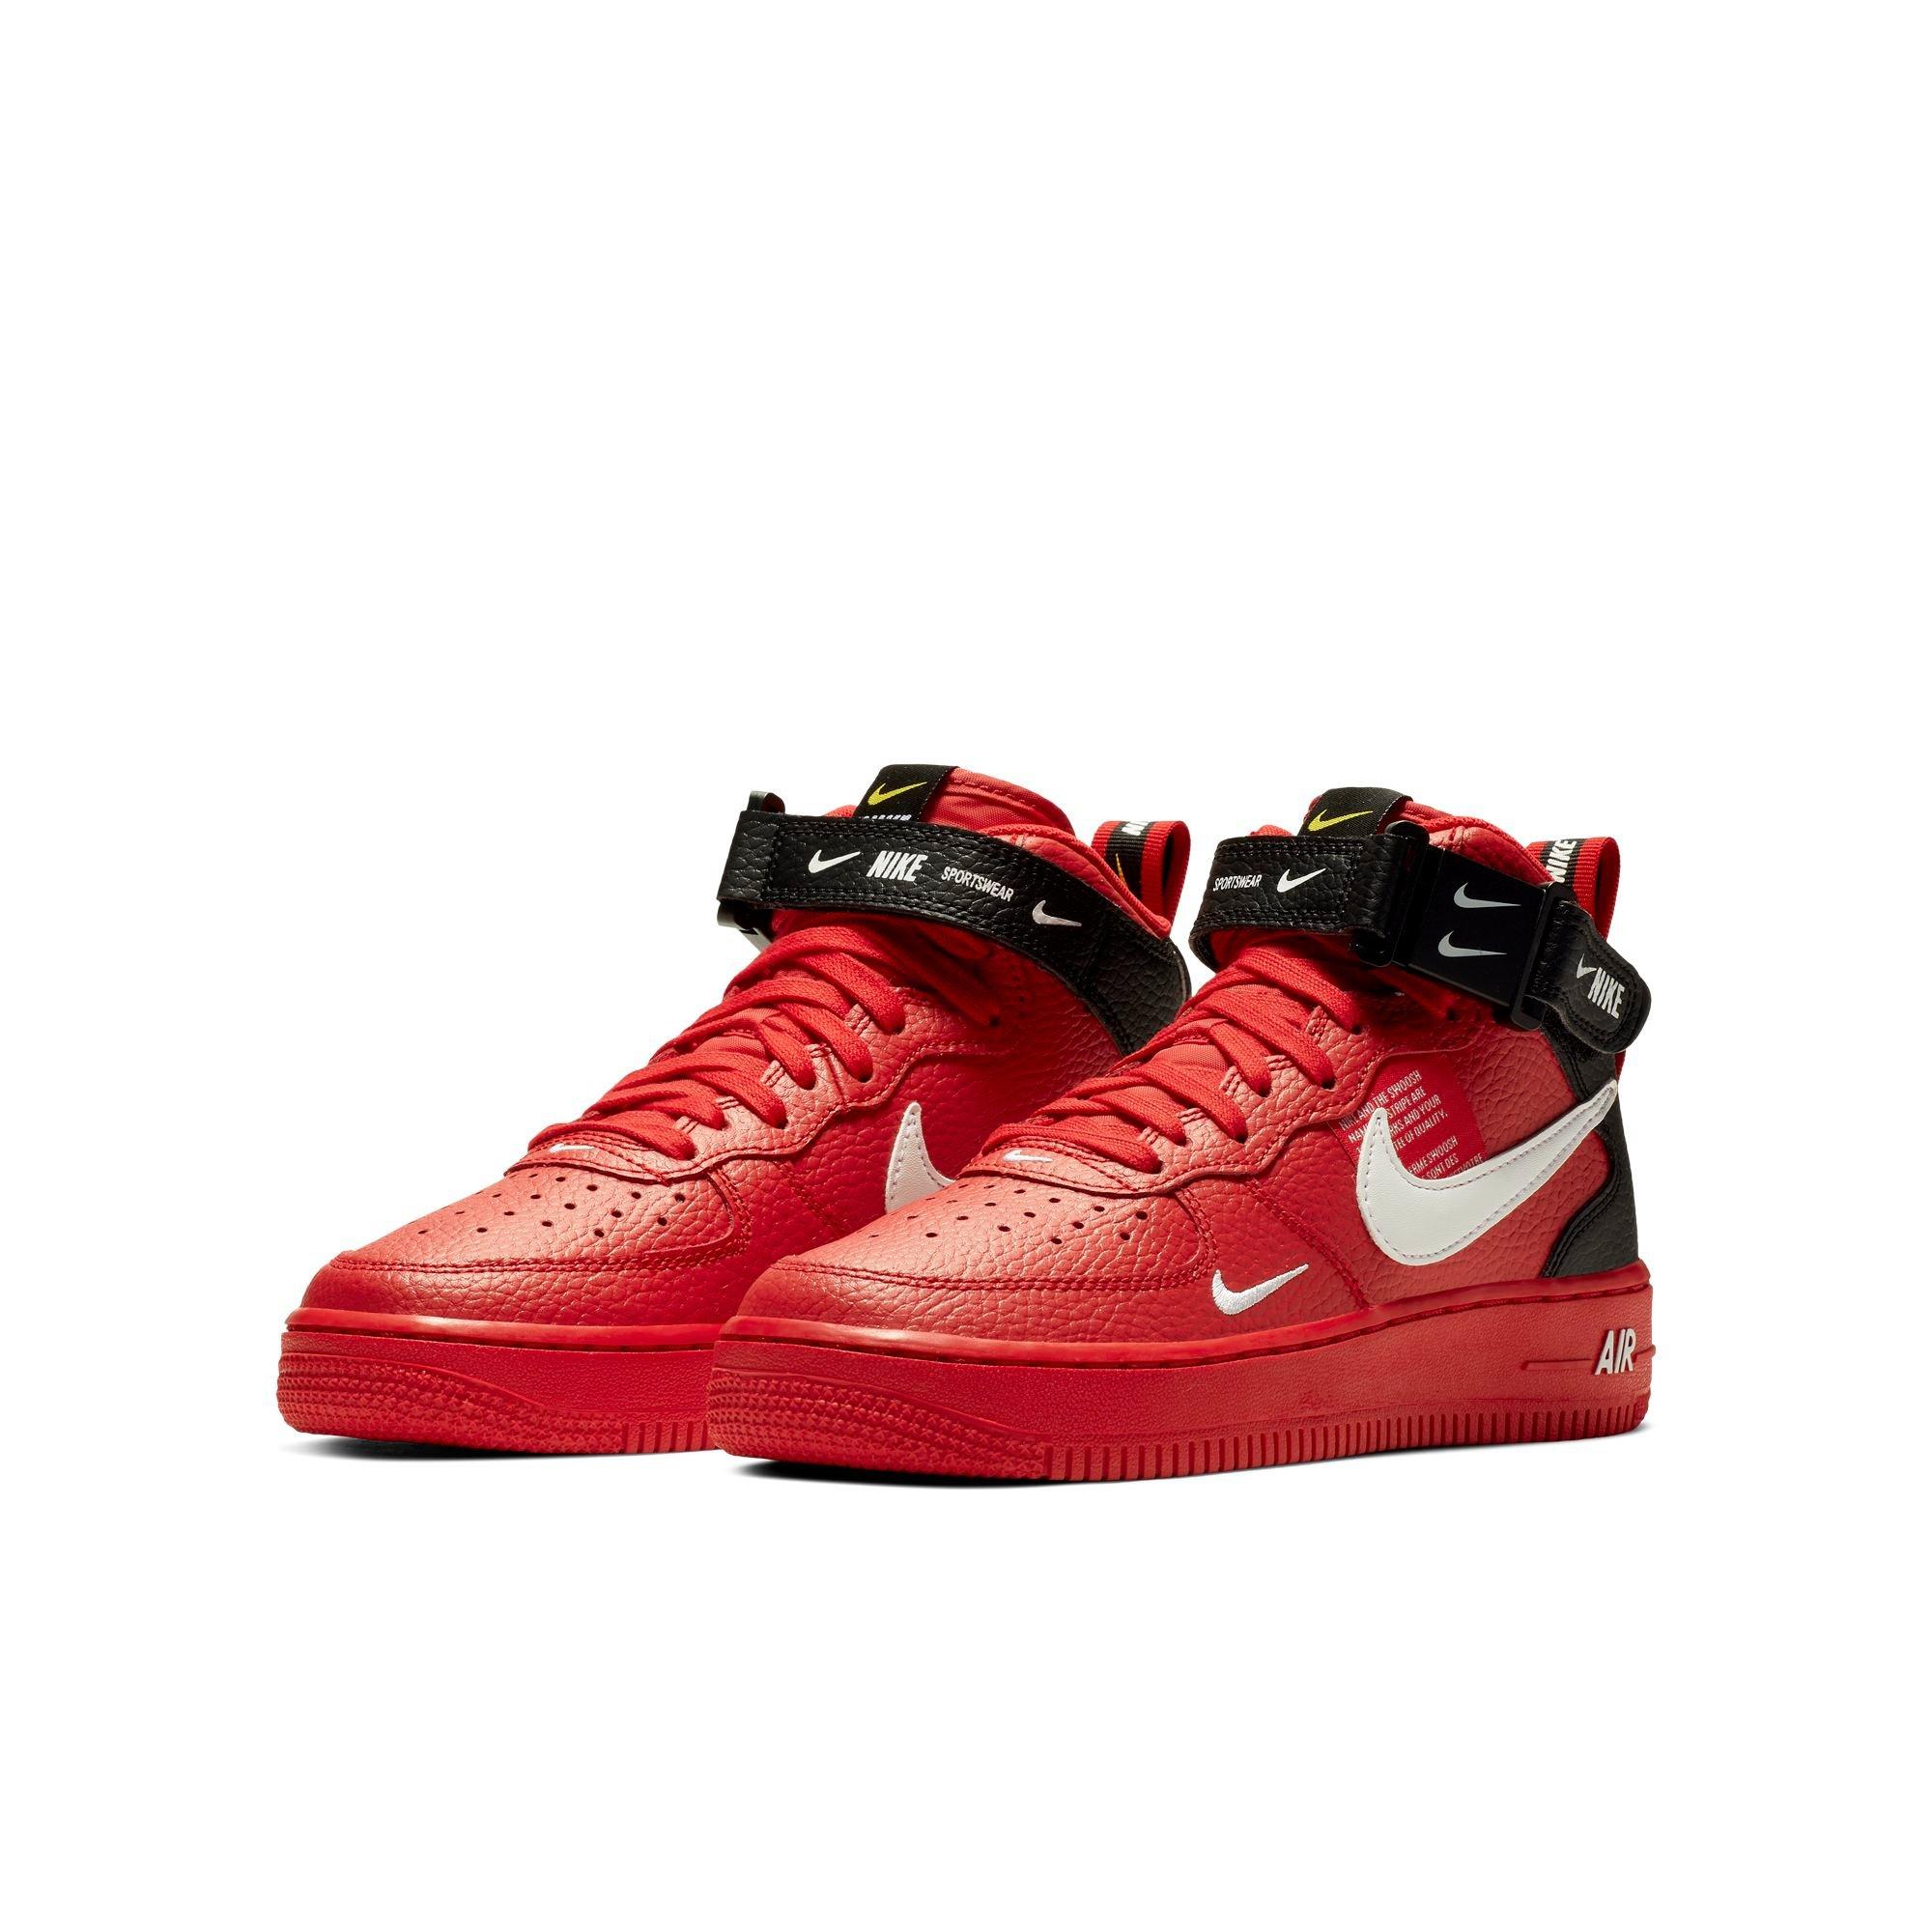 red nike air force 1 07 mid lv8